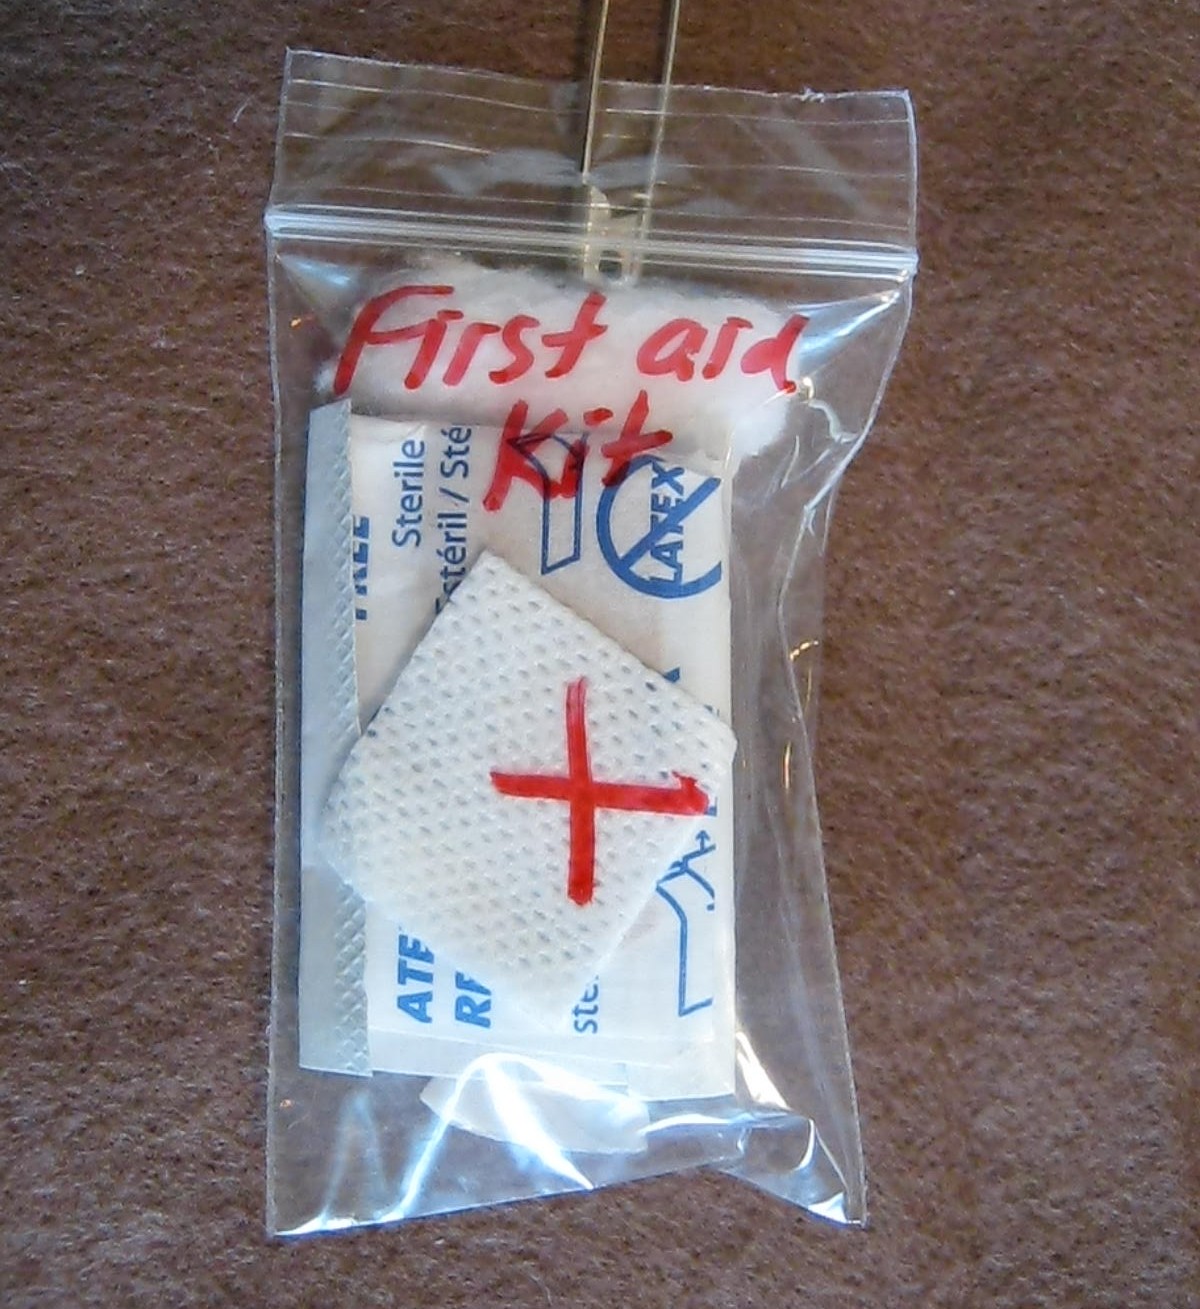 First Aid Kit Swap